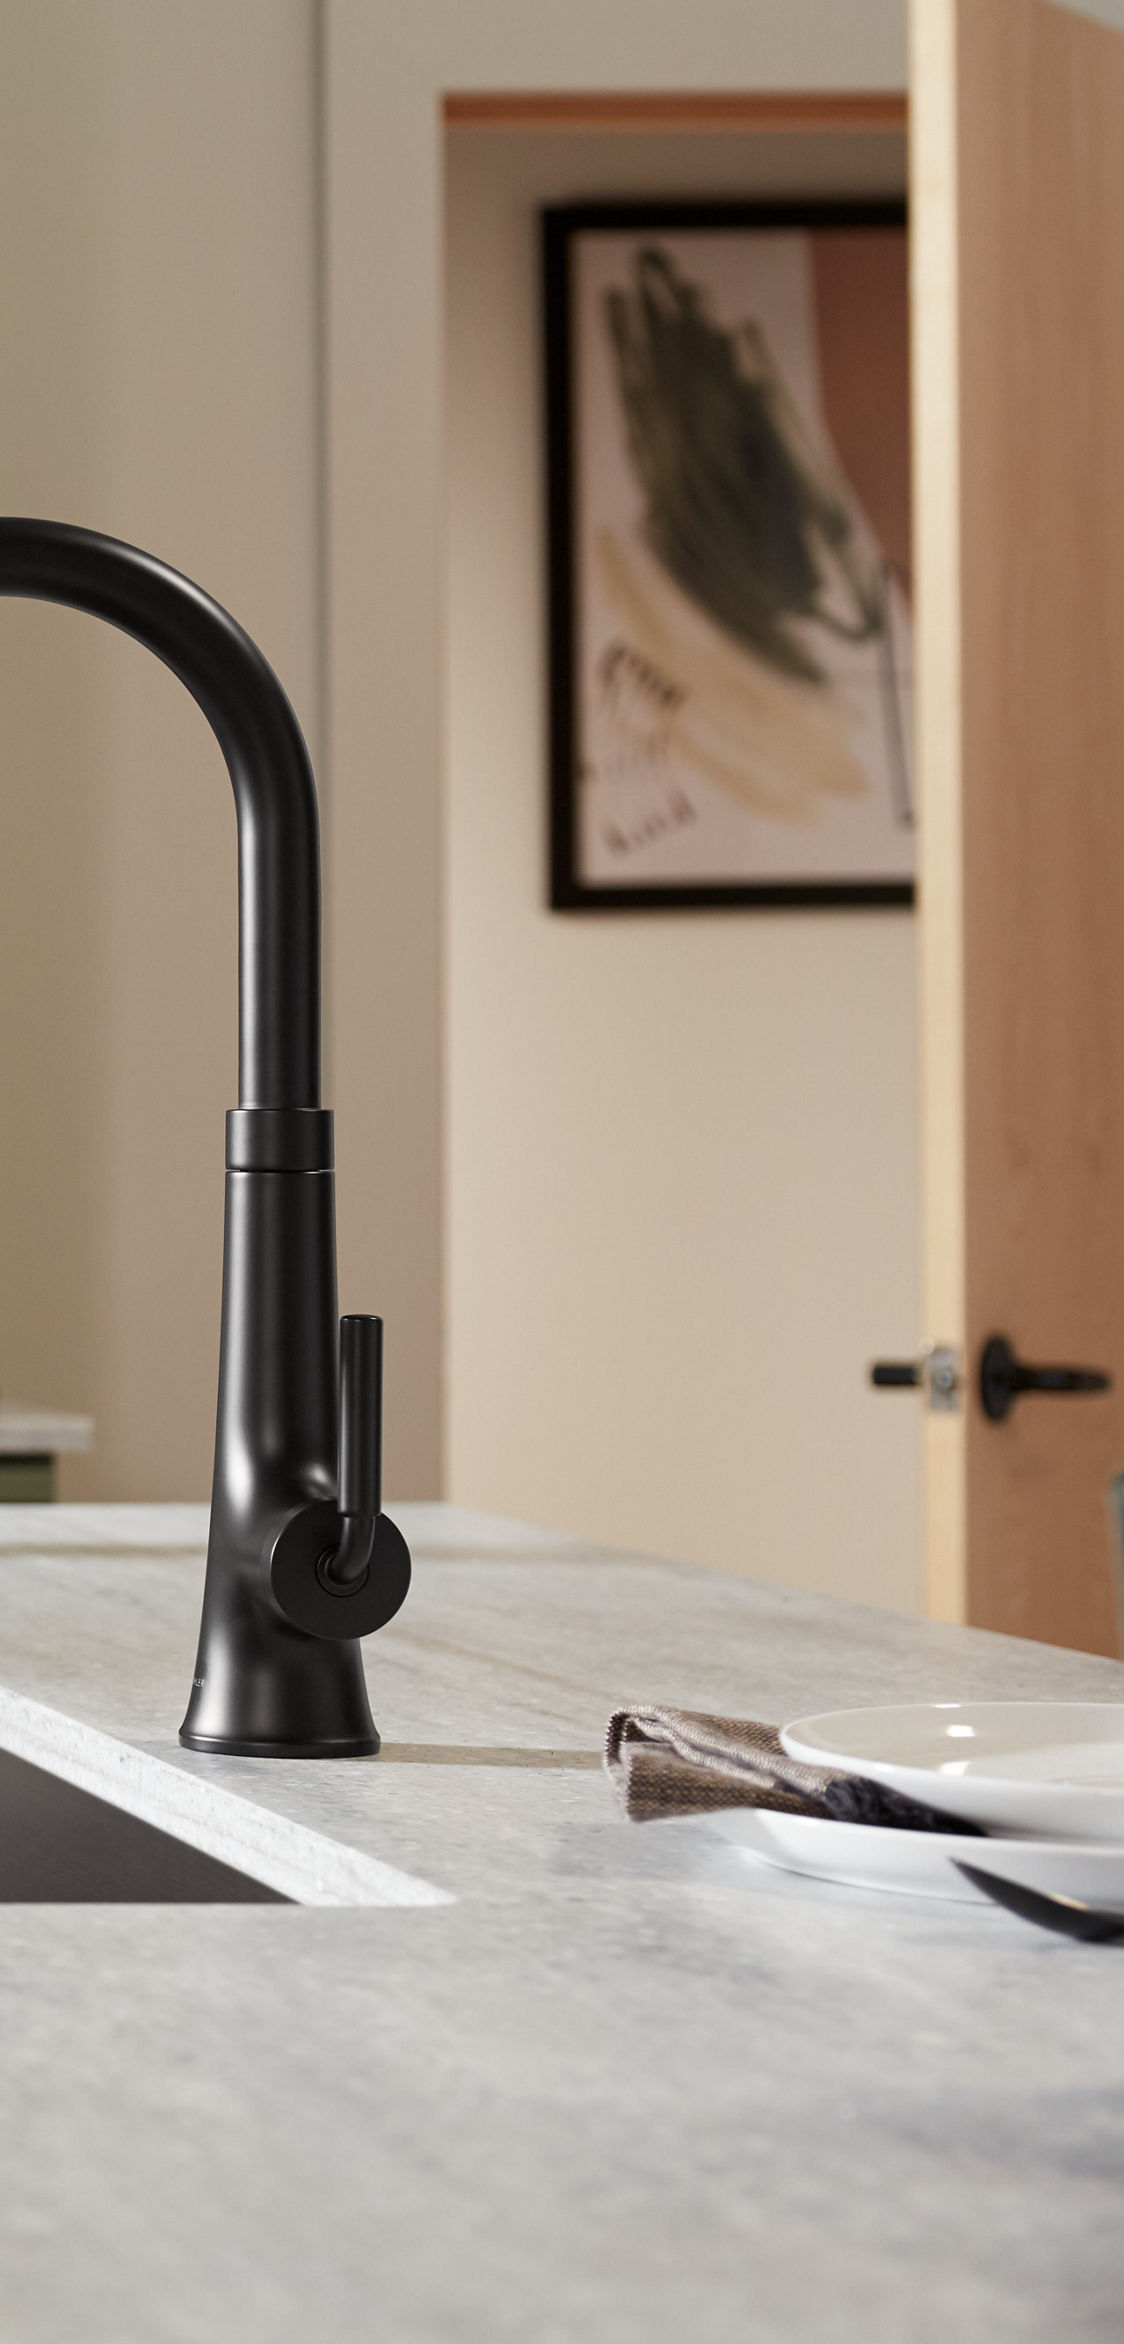 Tap smarter not harder with innovative kitchen taps